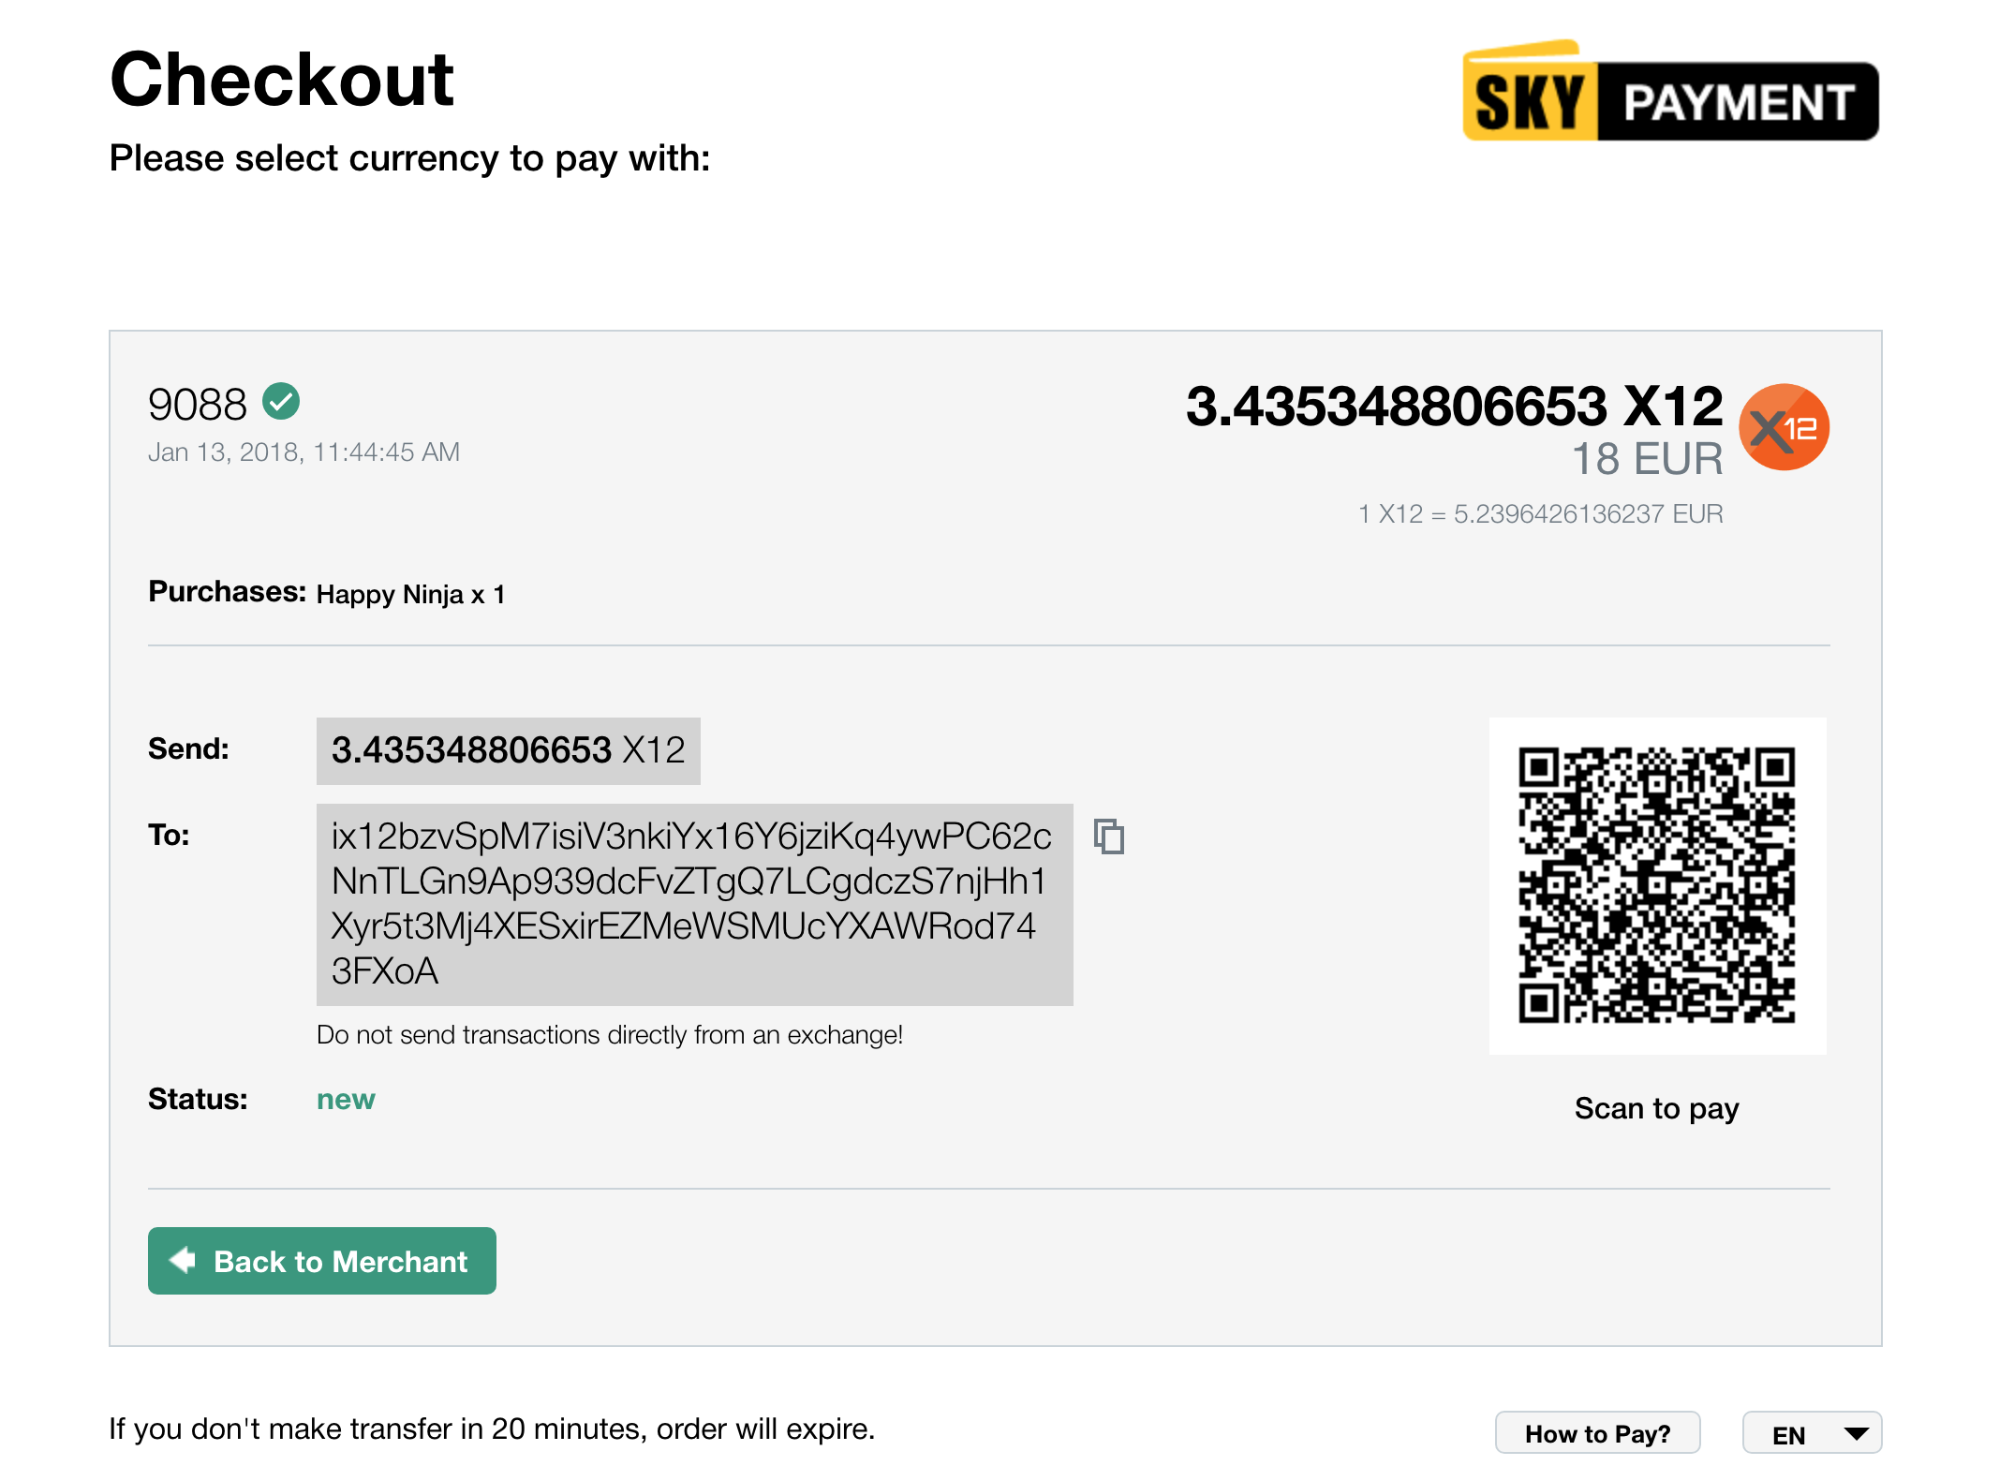 Woocommerce SkyPayment Plugin with QR Scanner for faster transactions.